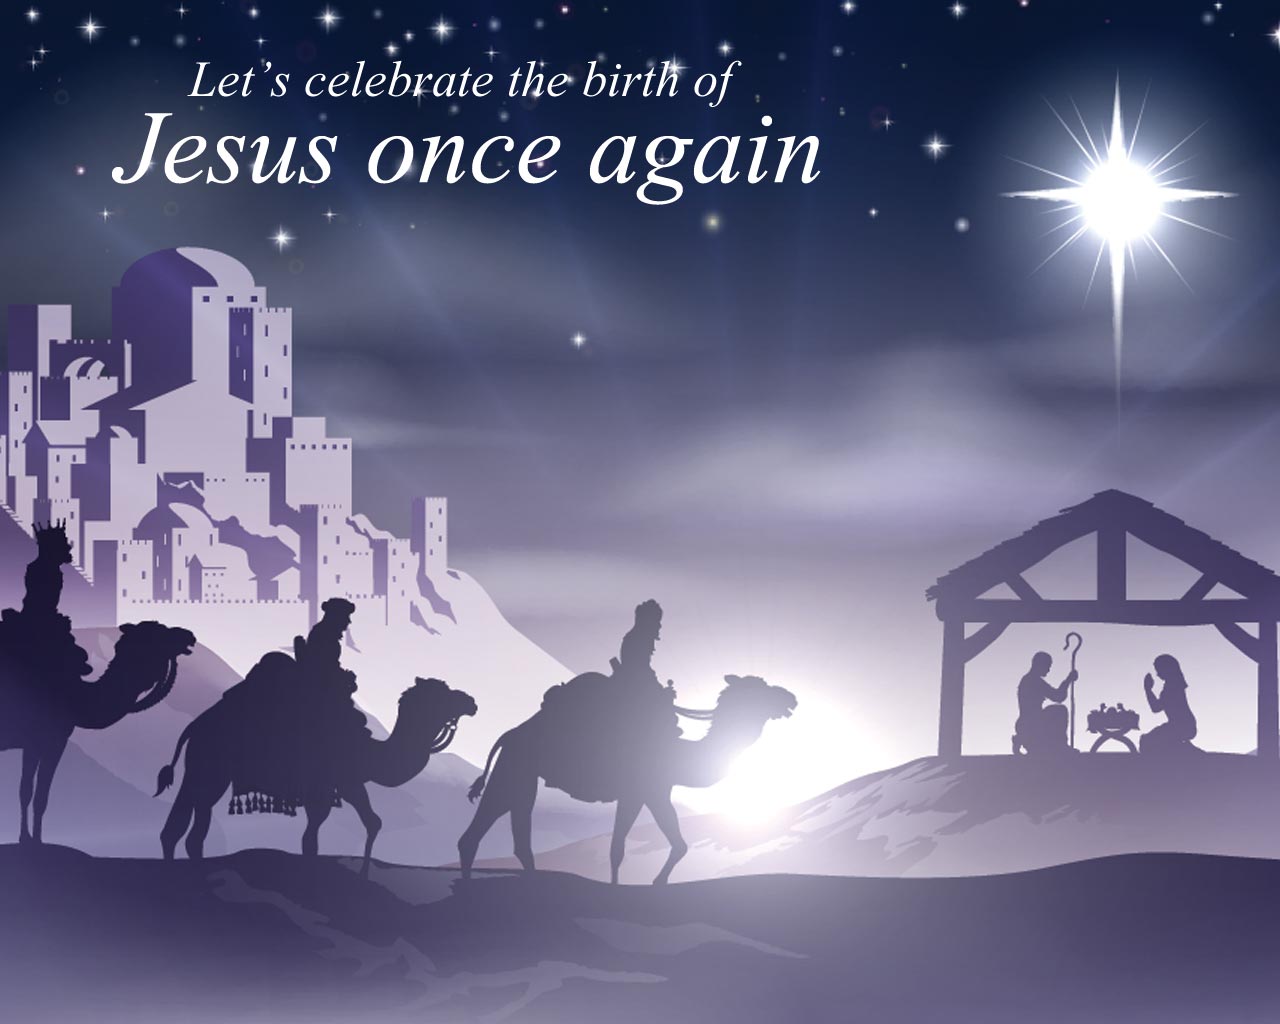 Let�s celebrate the birth of Jesus once again